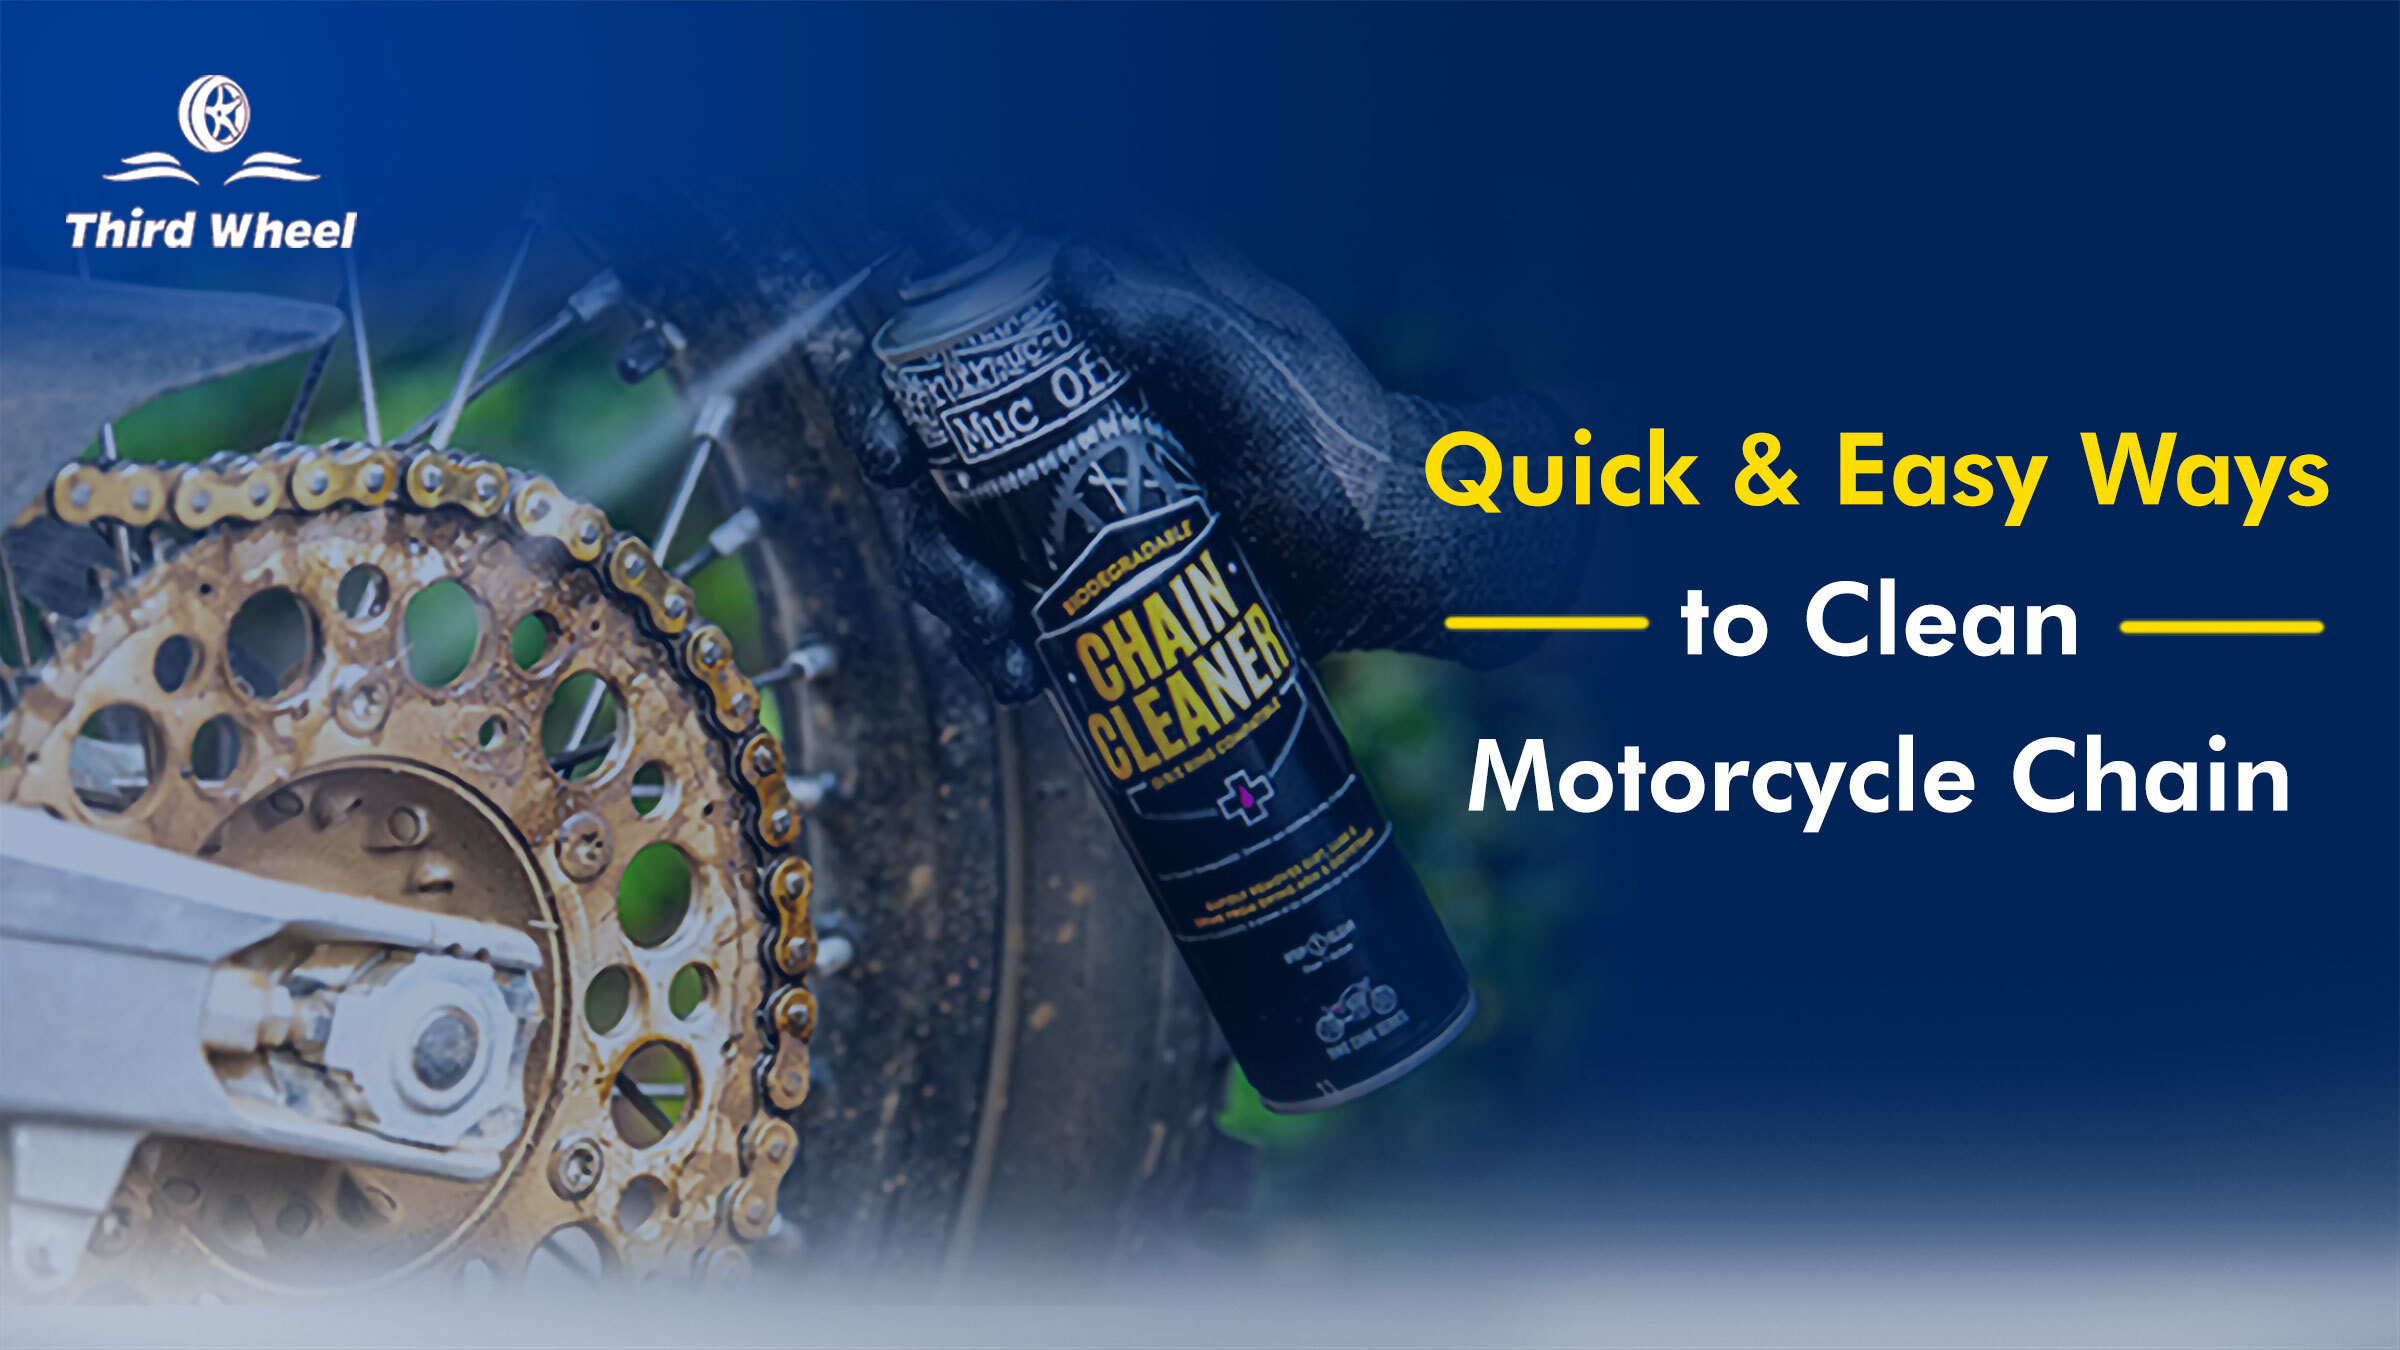 Simple & Quick steps to Clean your Motorcycle Chain at Home